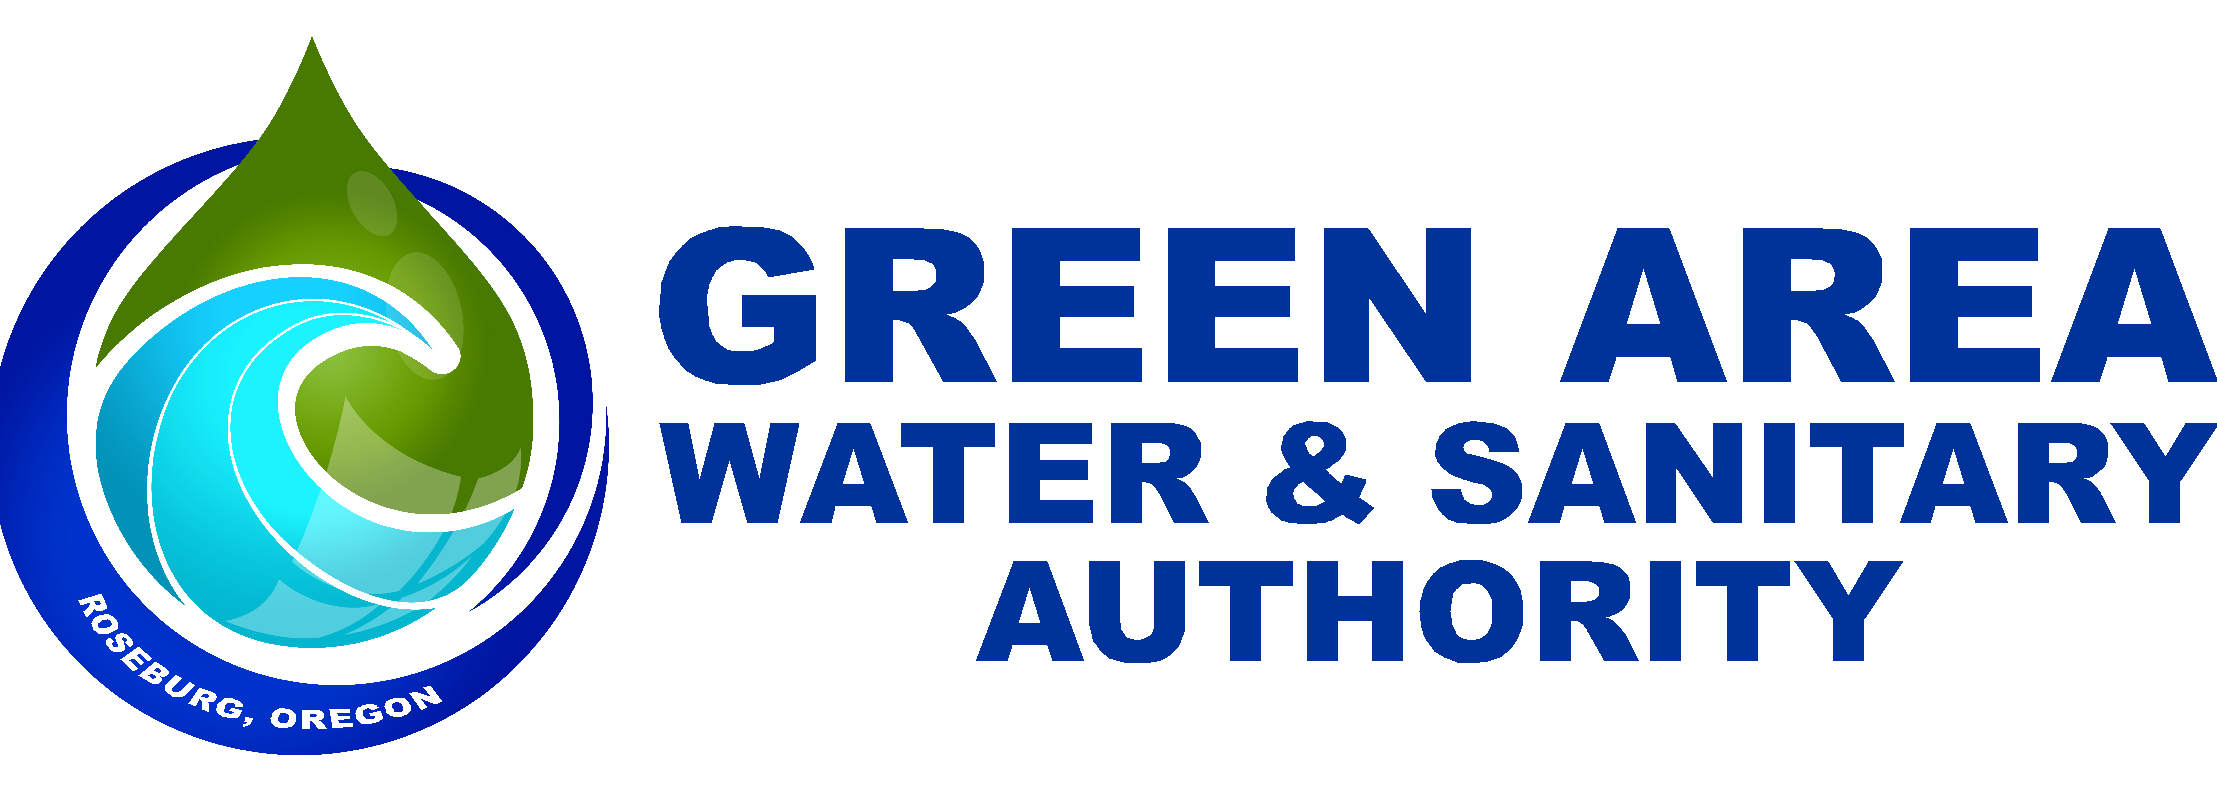 Green Area Water & Sanitary Authority